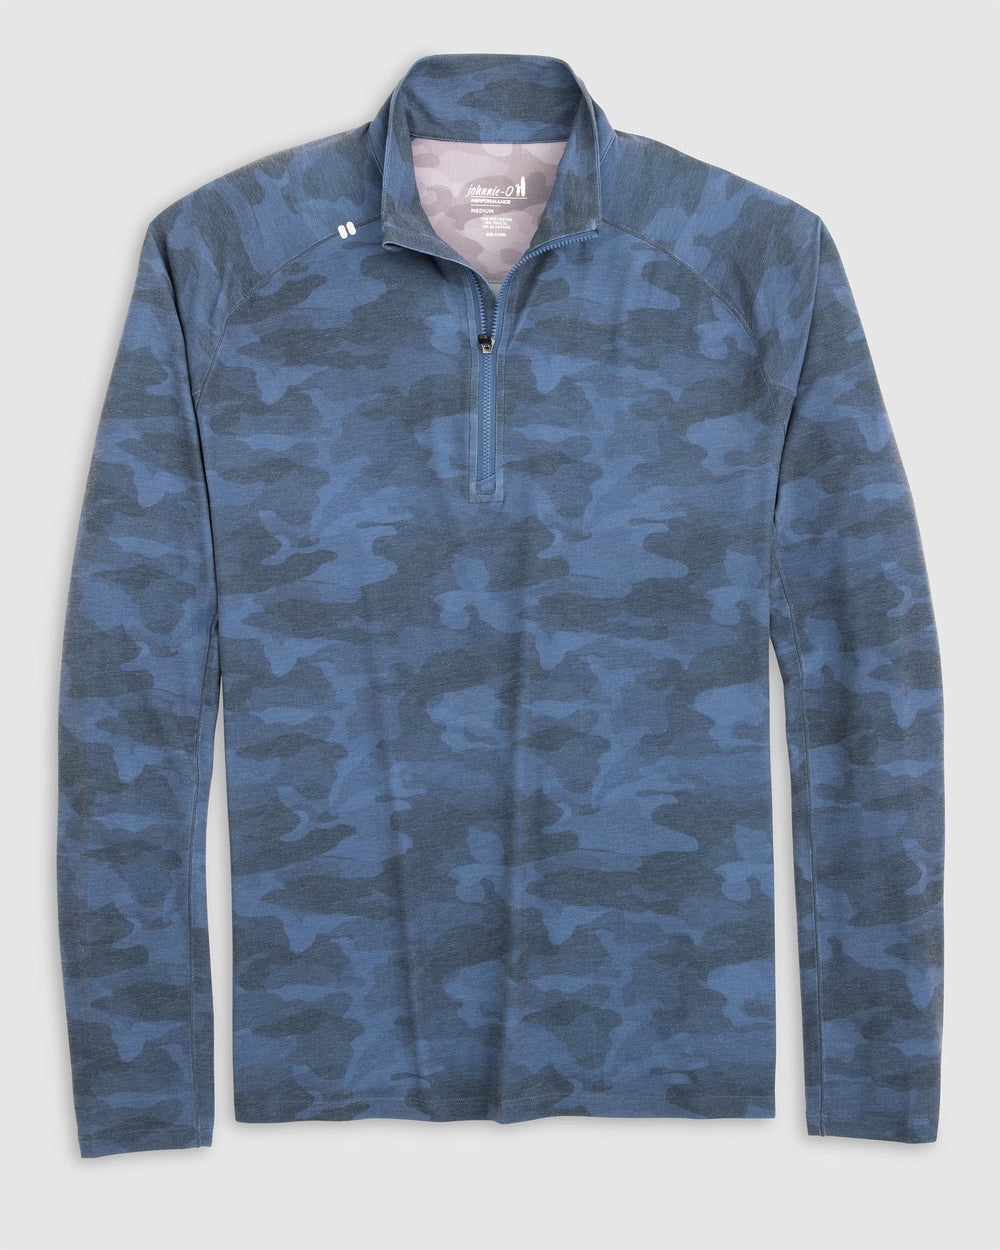 Johnnie-O Men's Galloway Performance Camo 1/4 Zip Pullover Apparel Johnnie-O Lake Small 